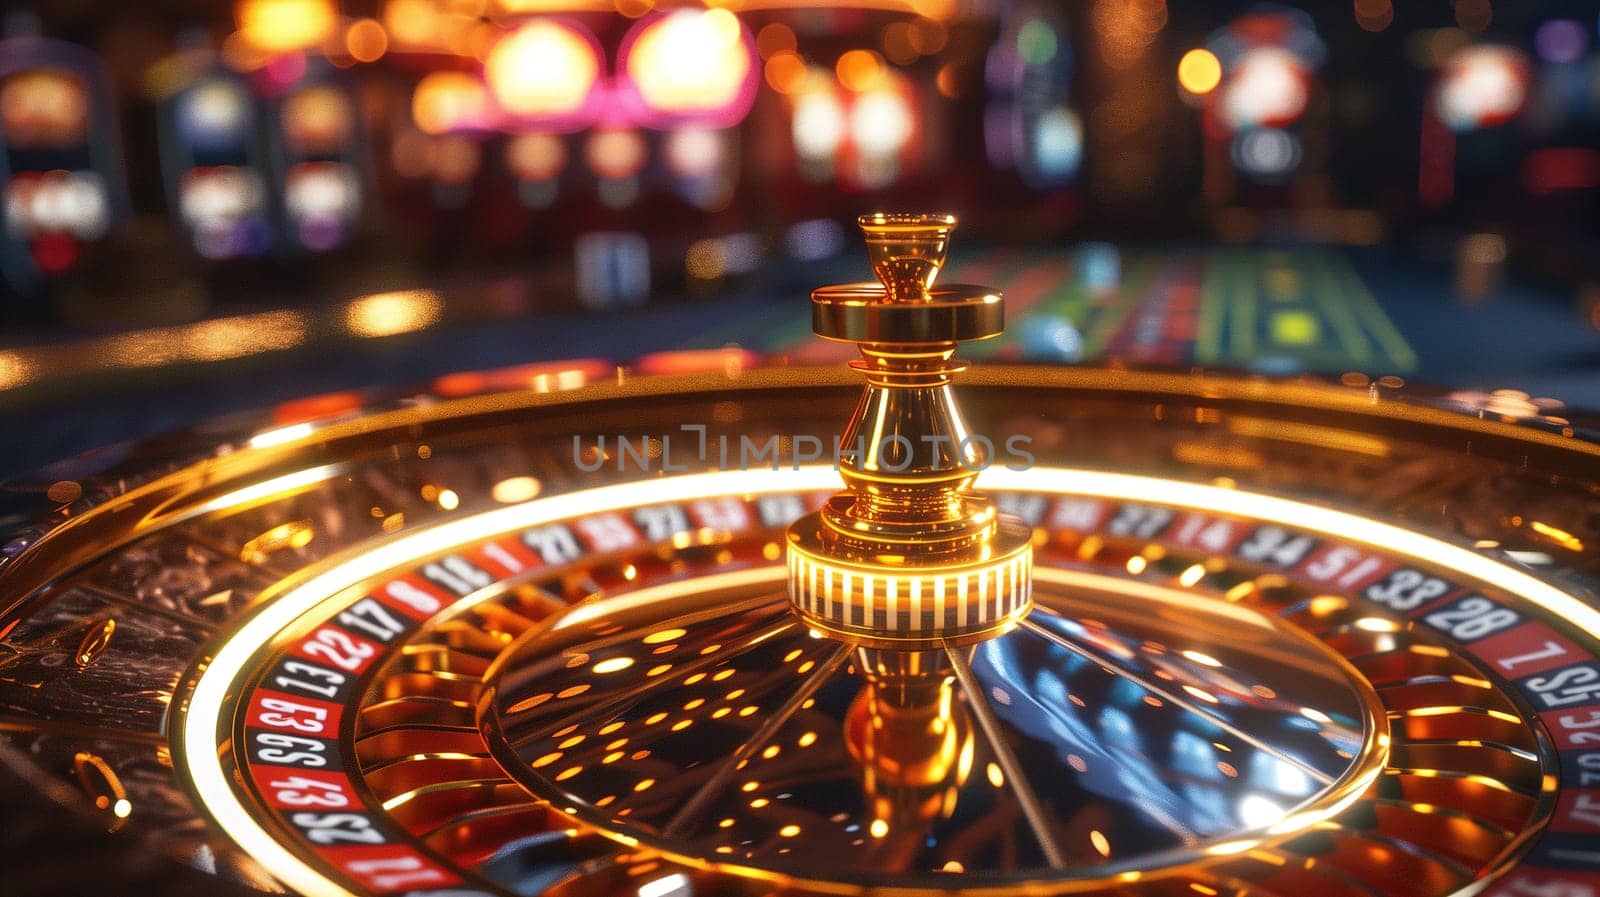 A casino roulette wheel set in a busy casino room with players placing bets and the wheel spinning. The room is filled with excitement and anticipation as gamblers try their luck.